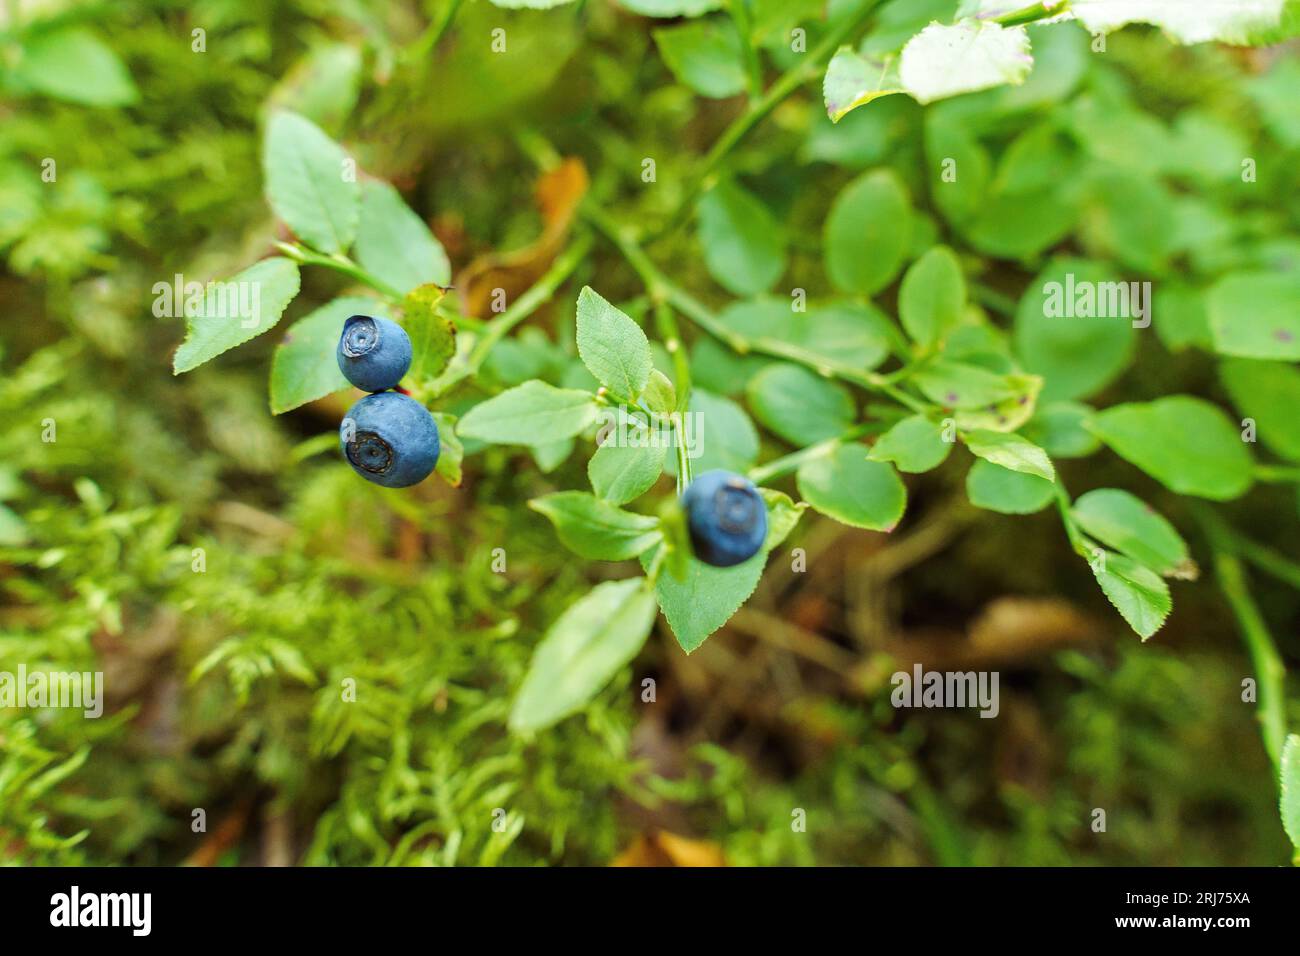 Wild blueberries grow on a bush in the forest Stock Photo